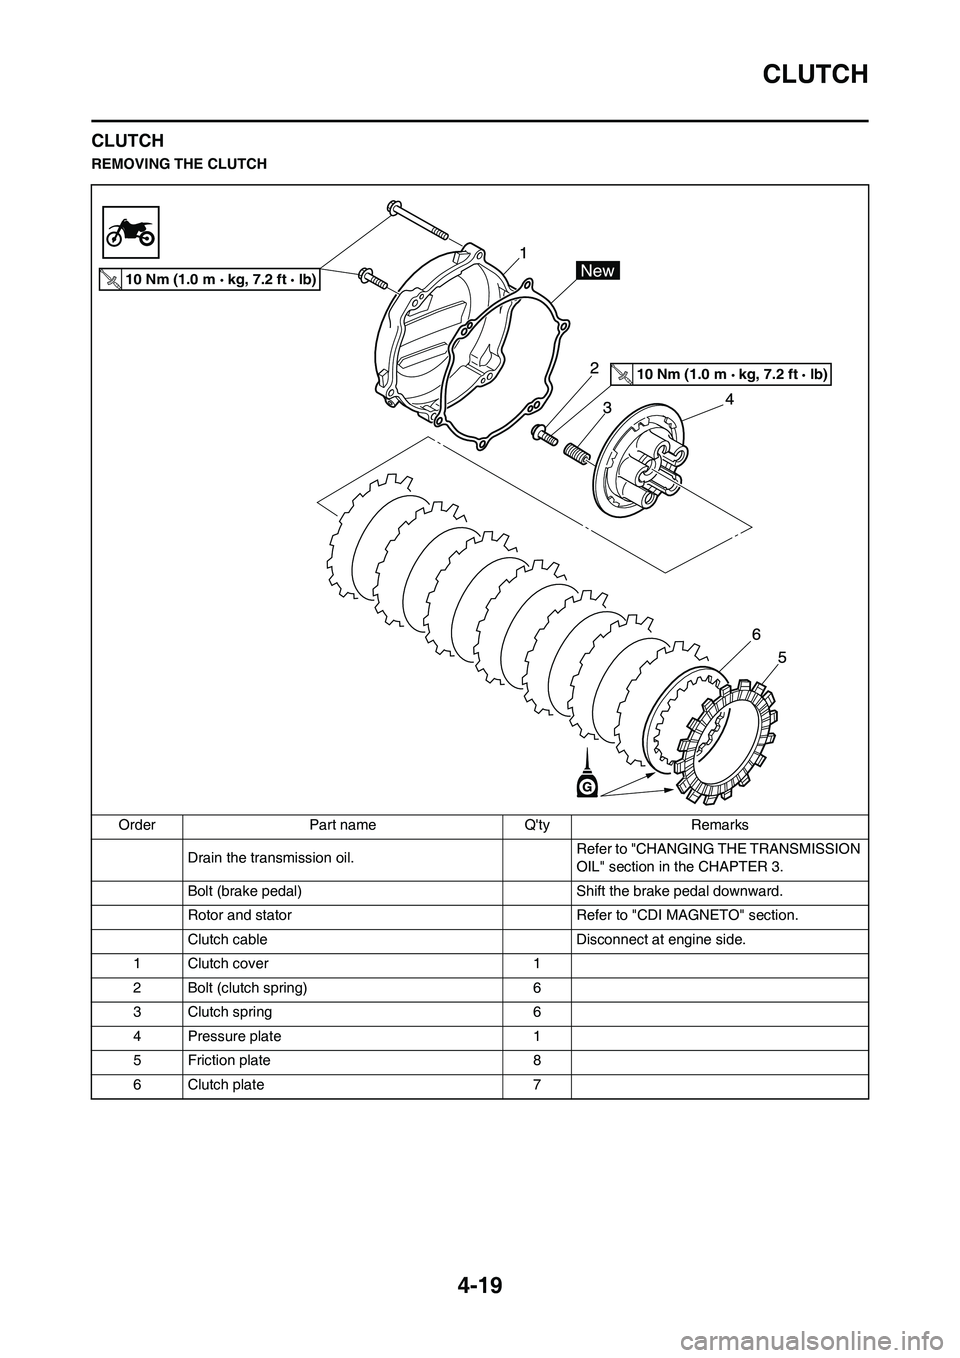 YAMAHA YZ125LC 2010 Owners Guide 4-19
CLUTCH
CLUTCH
REMOVING THE CLUTCH
Order Part name Qty Remarks
Drain the transmission oil.Refer to "CHANGING THE TRANSMISSION 
OIL" section in the CHAPTER 3.
Bolt (brake pedal) Shift the brake pe